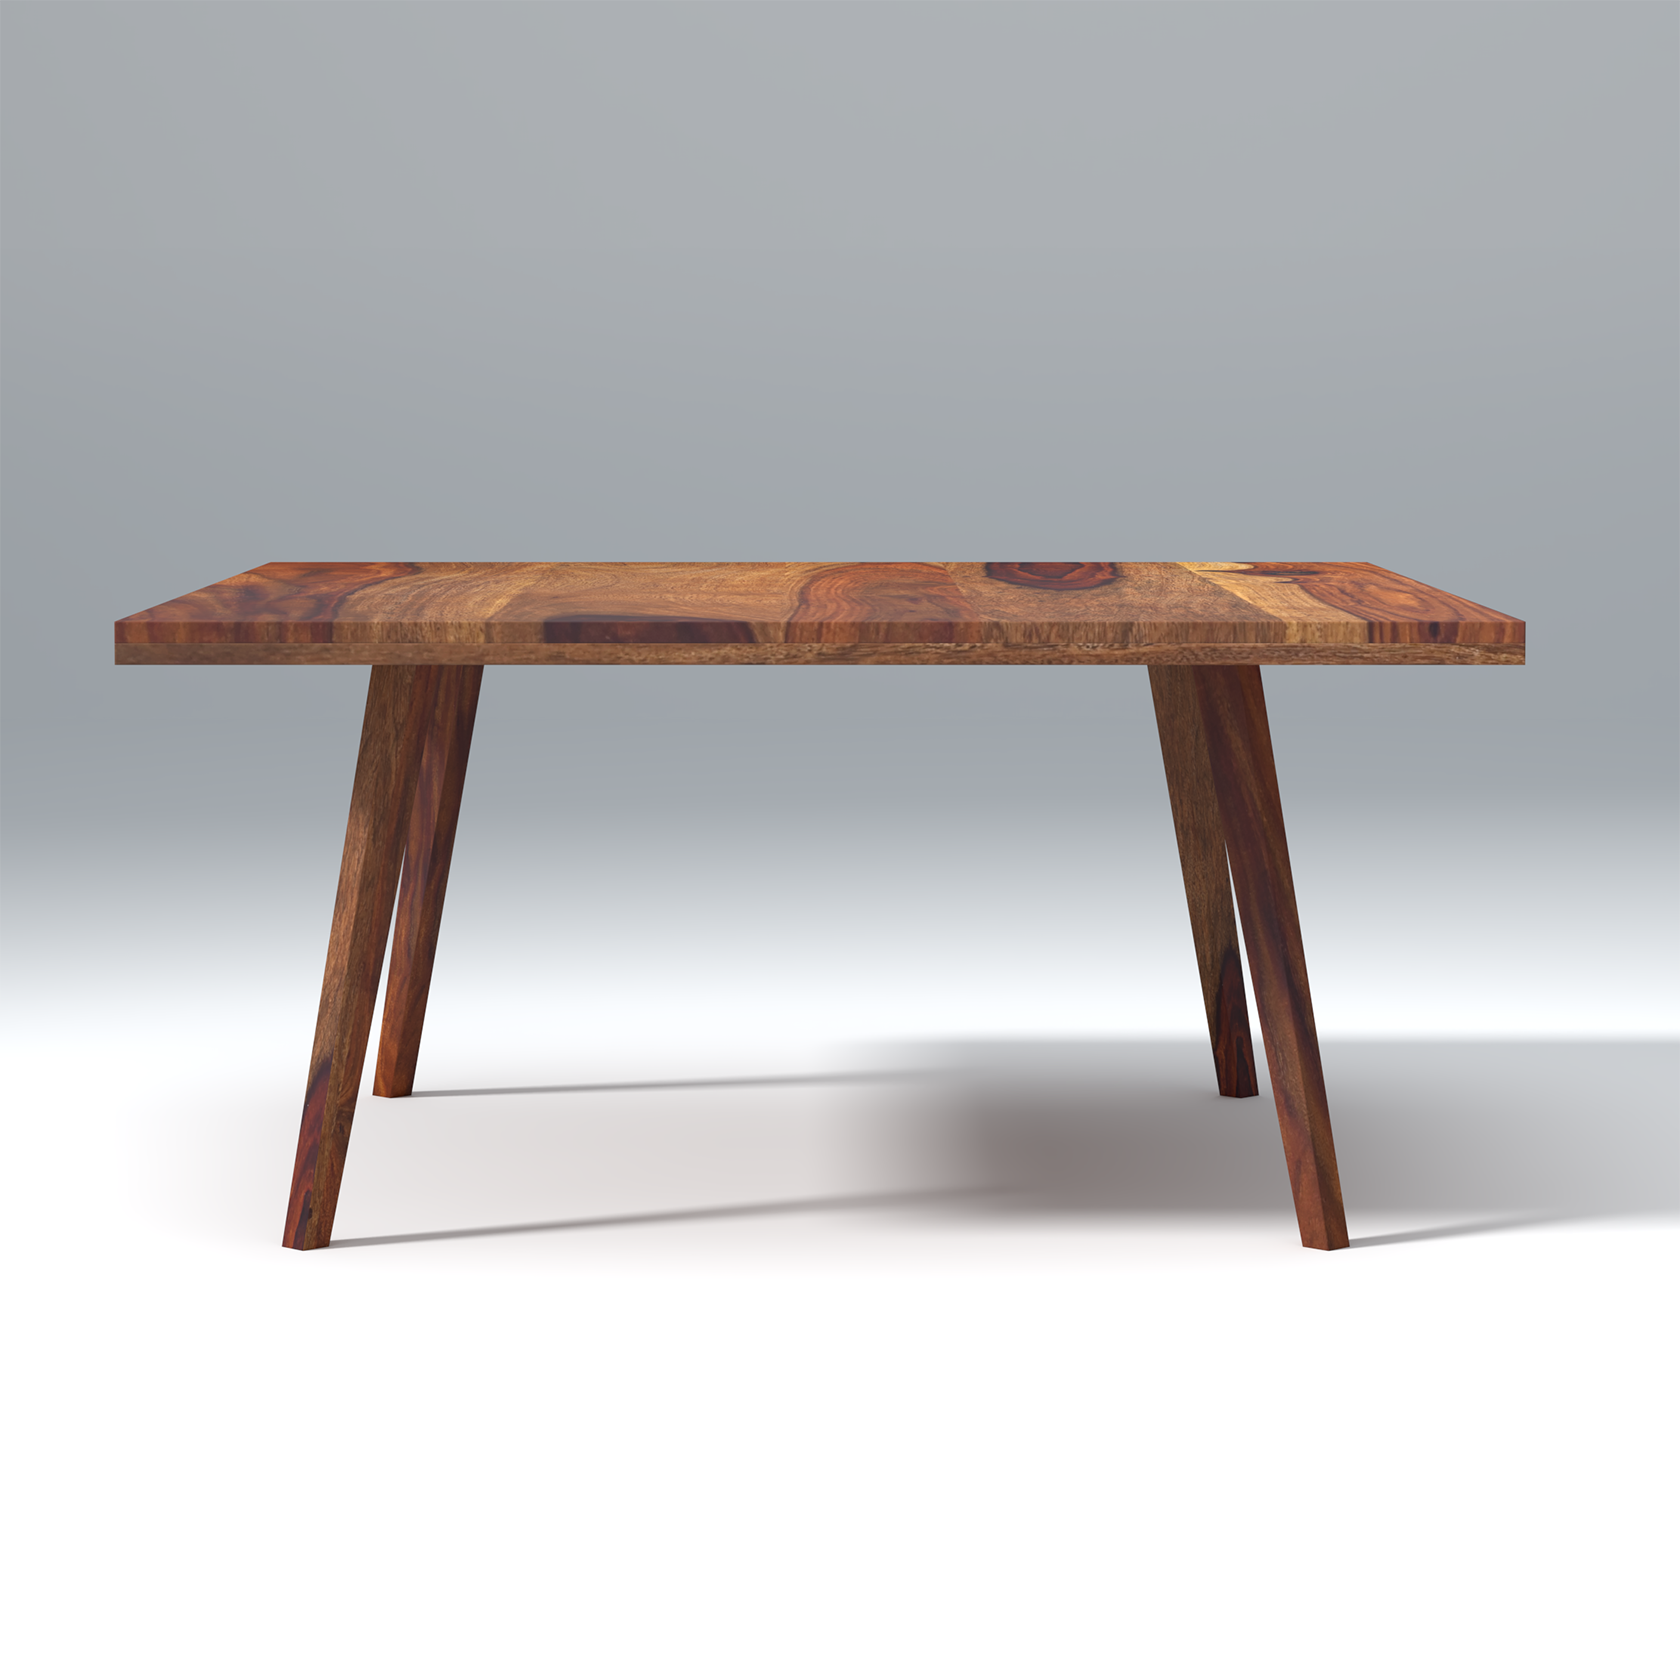 Resonance dining table In Reddish walnut color with 6 Seating